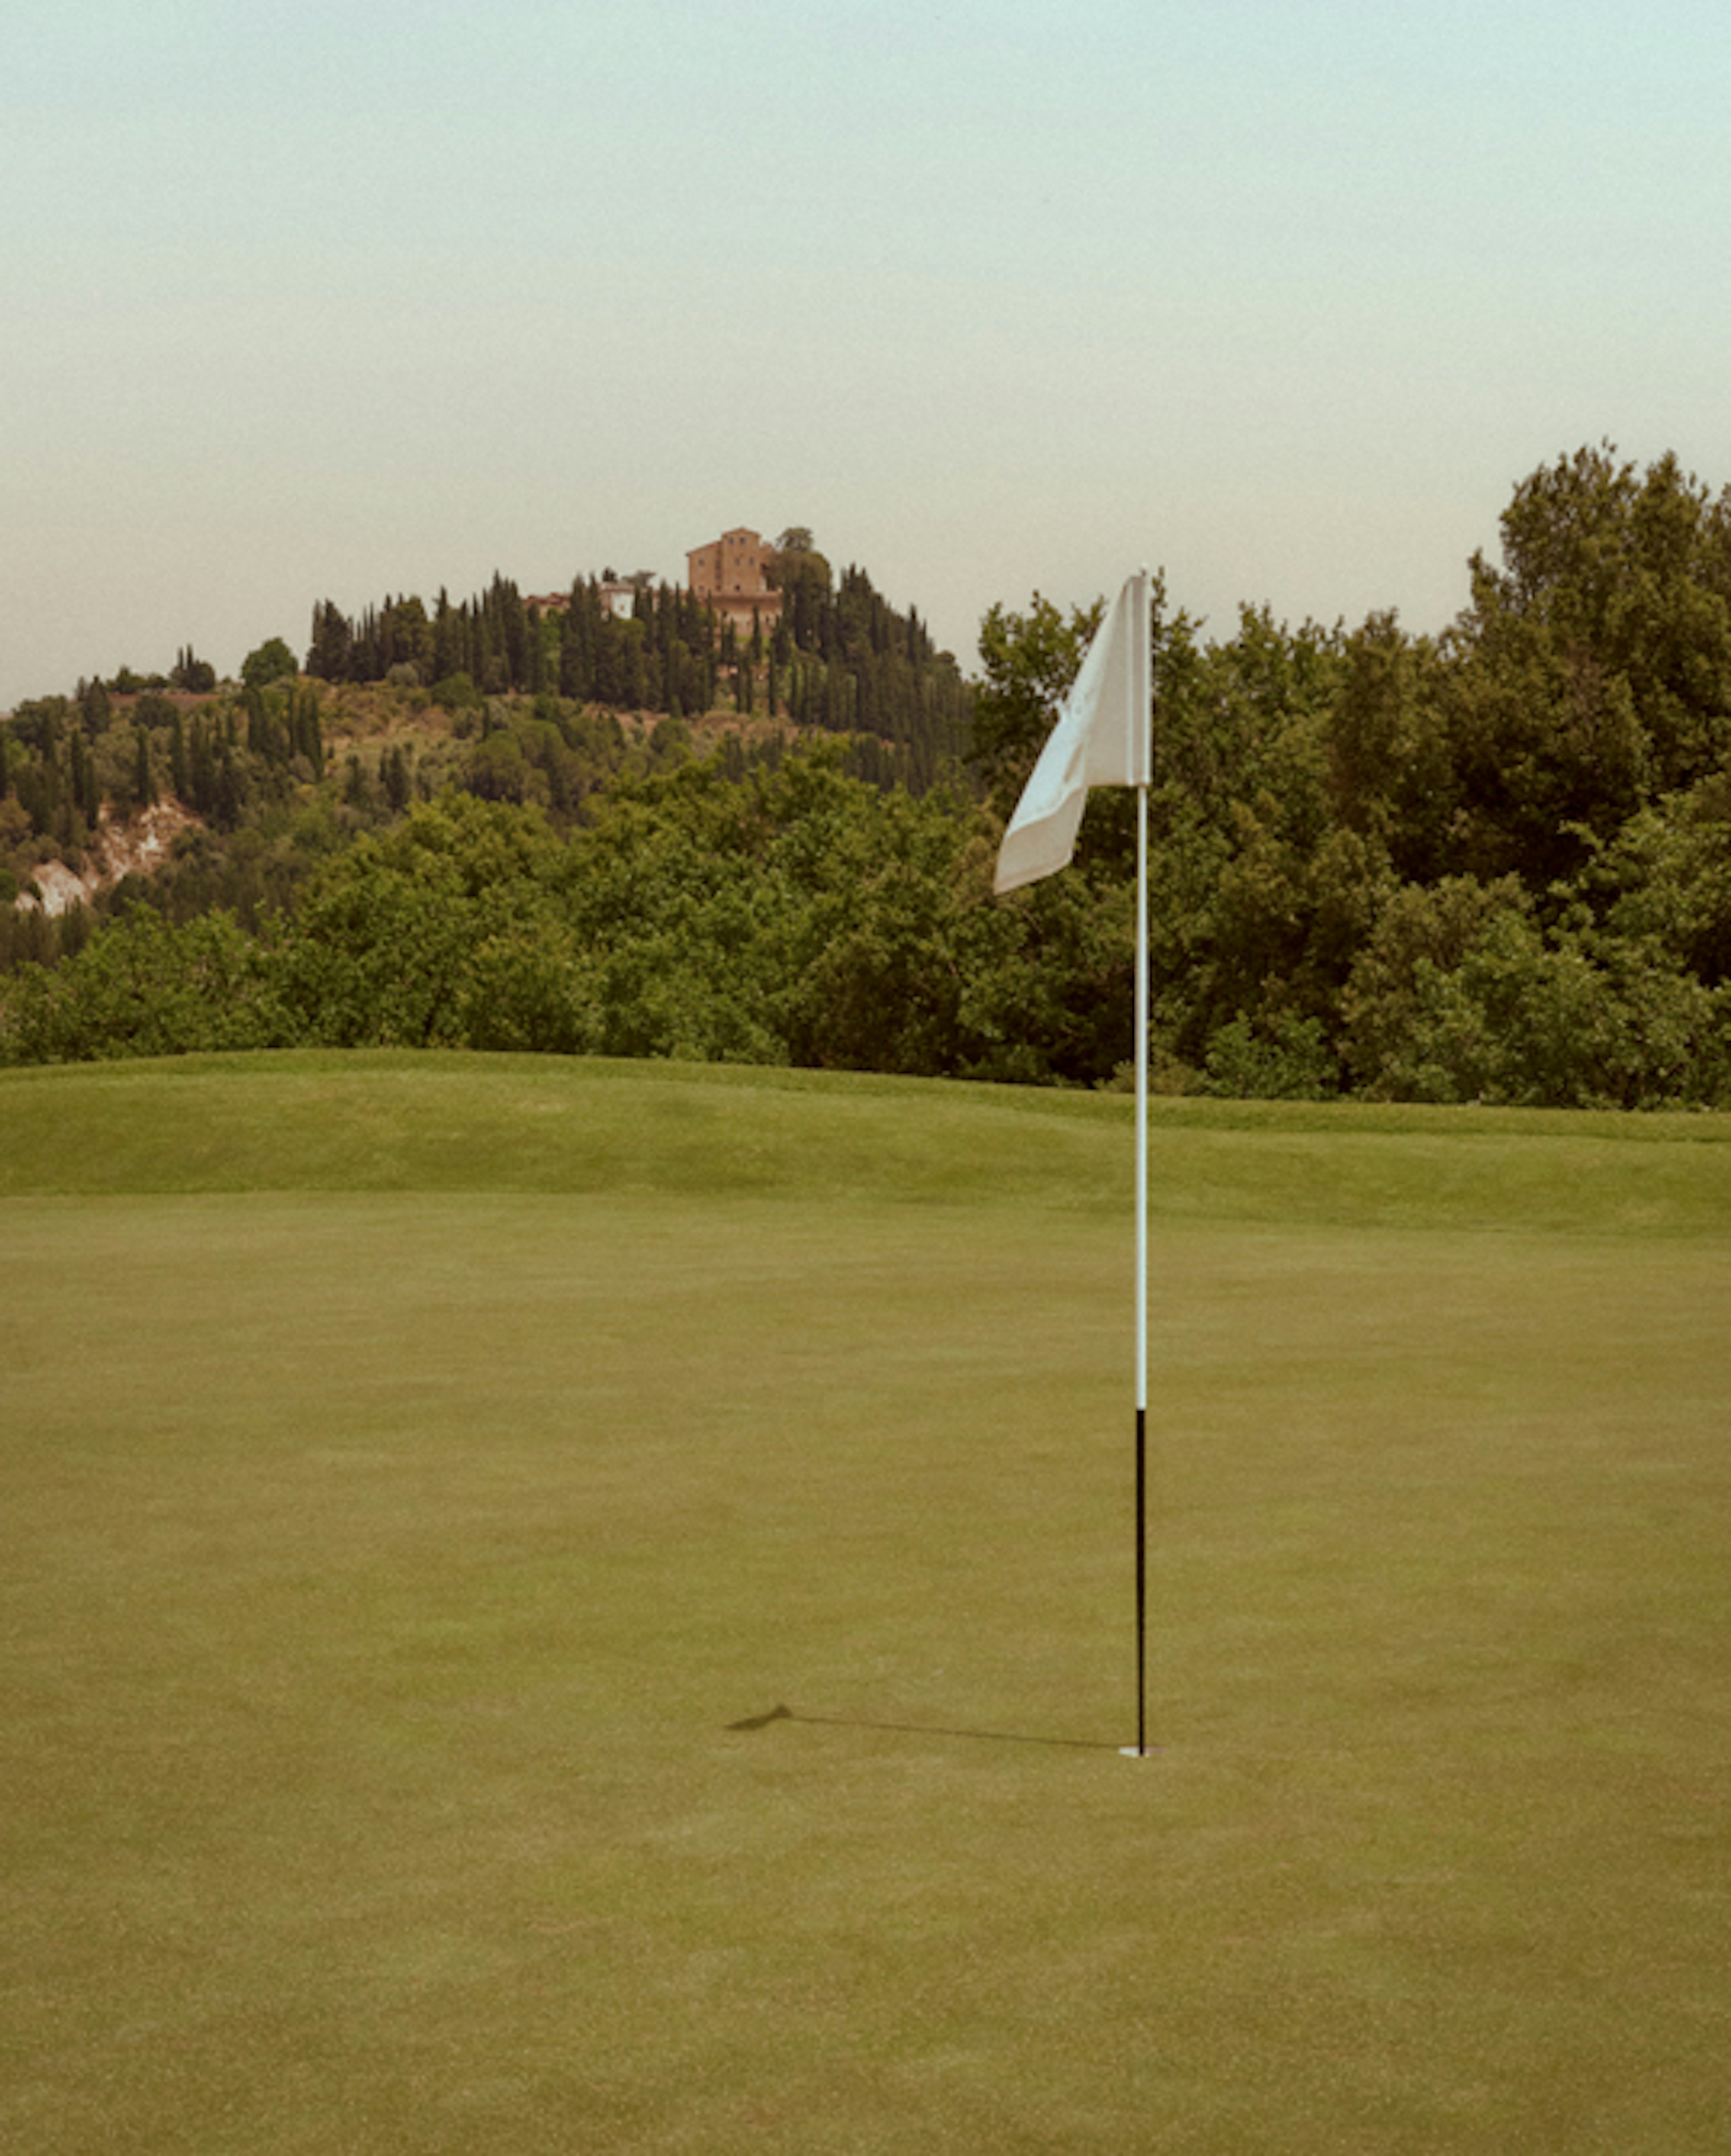 The short break in the biggest golf club of Tuscany immersed in nature